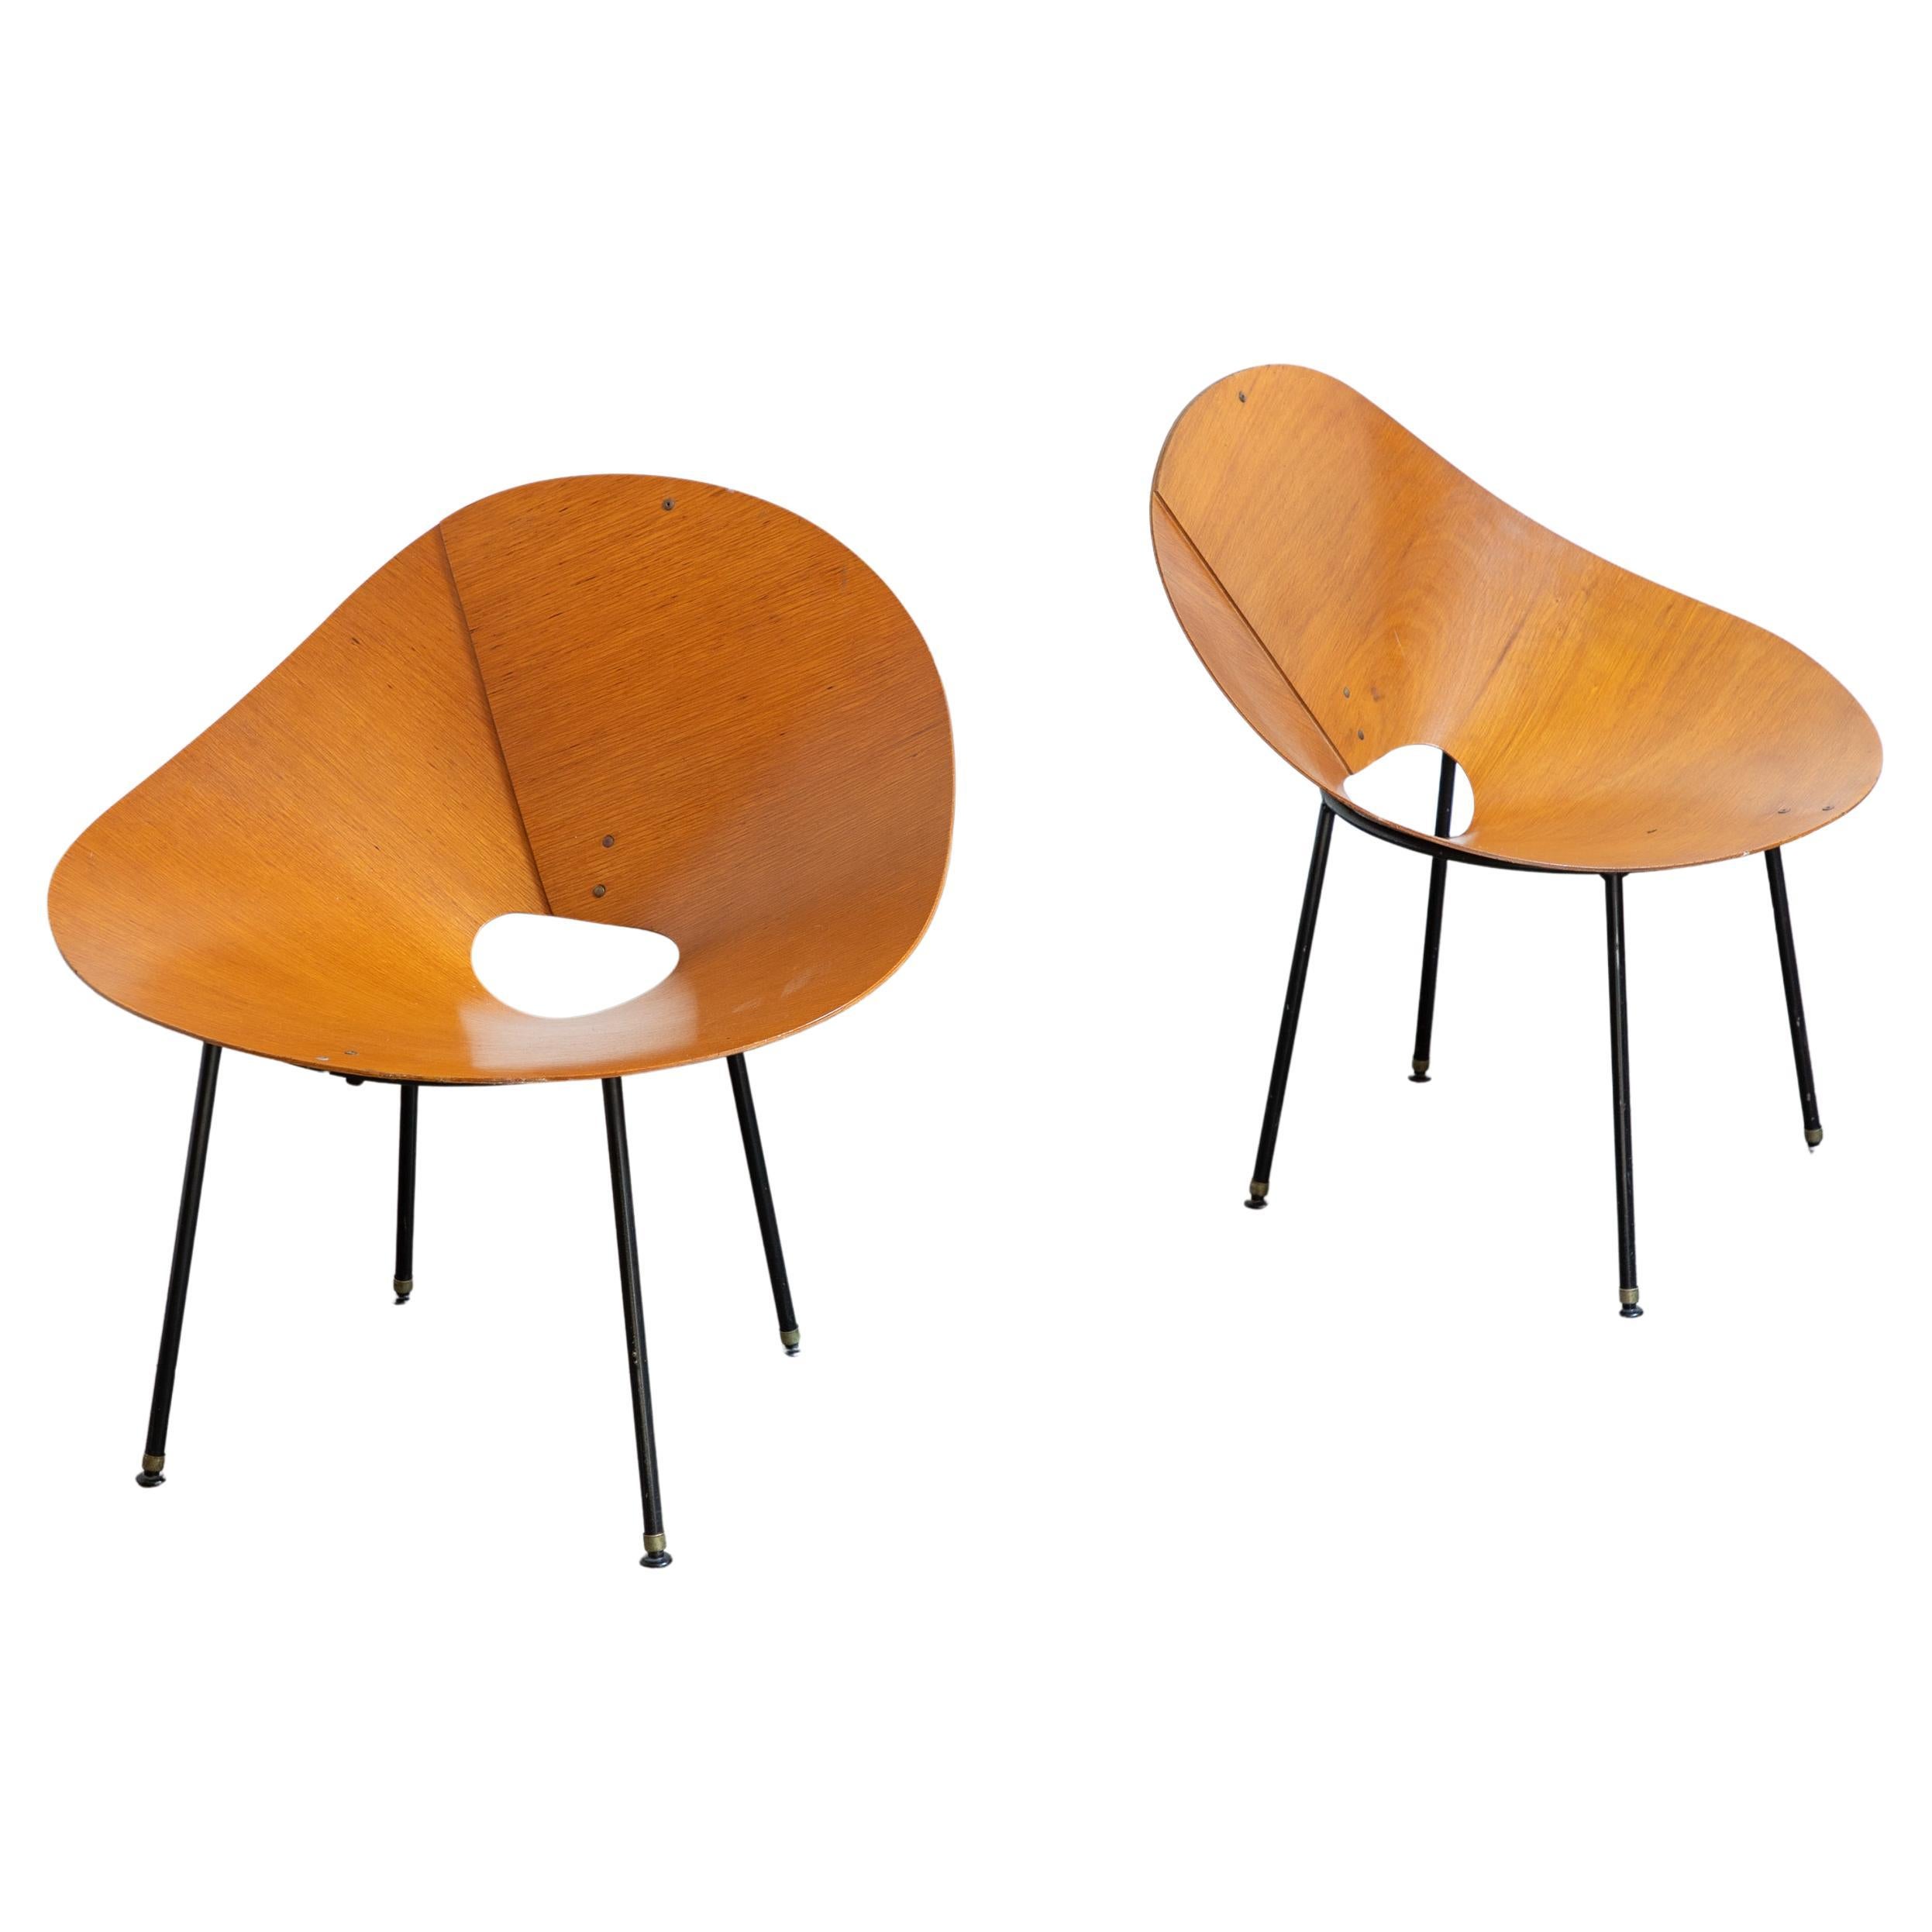 Plywood Mid Century Modern Kone Lounge Chairs by Australian designer Roger McLay For Sale